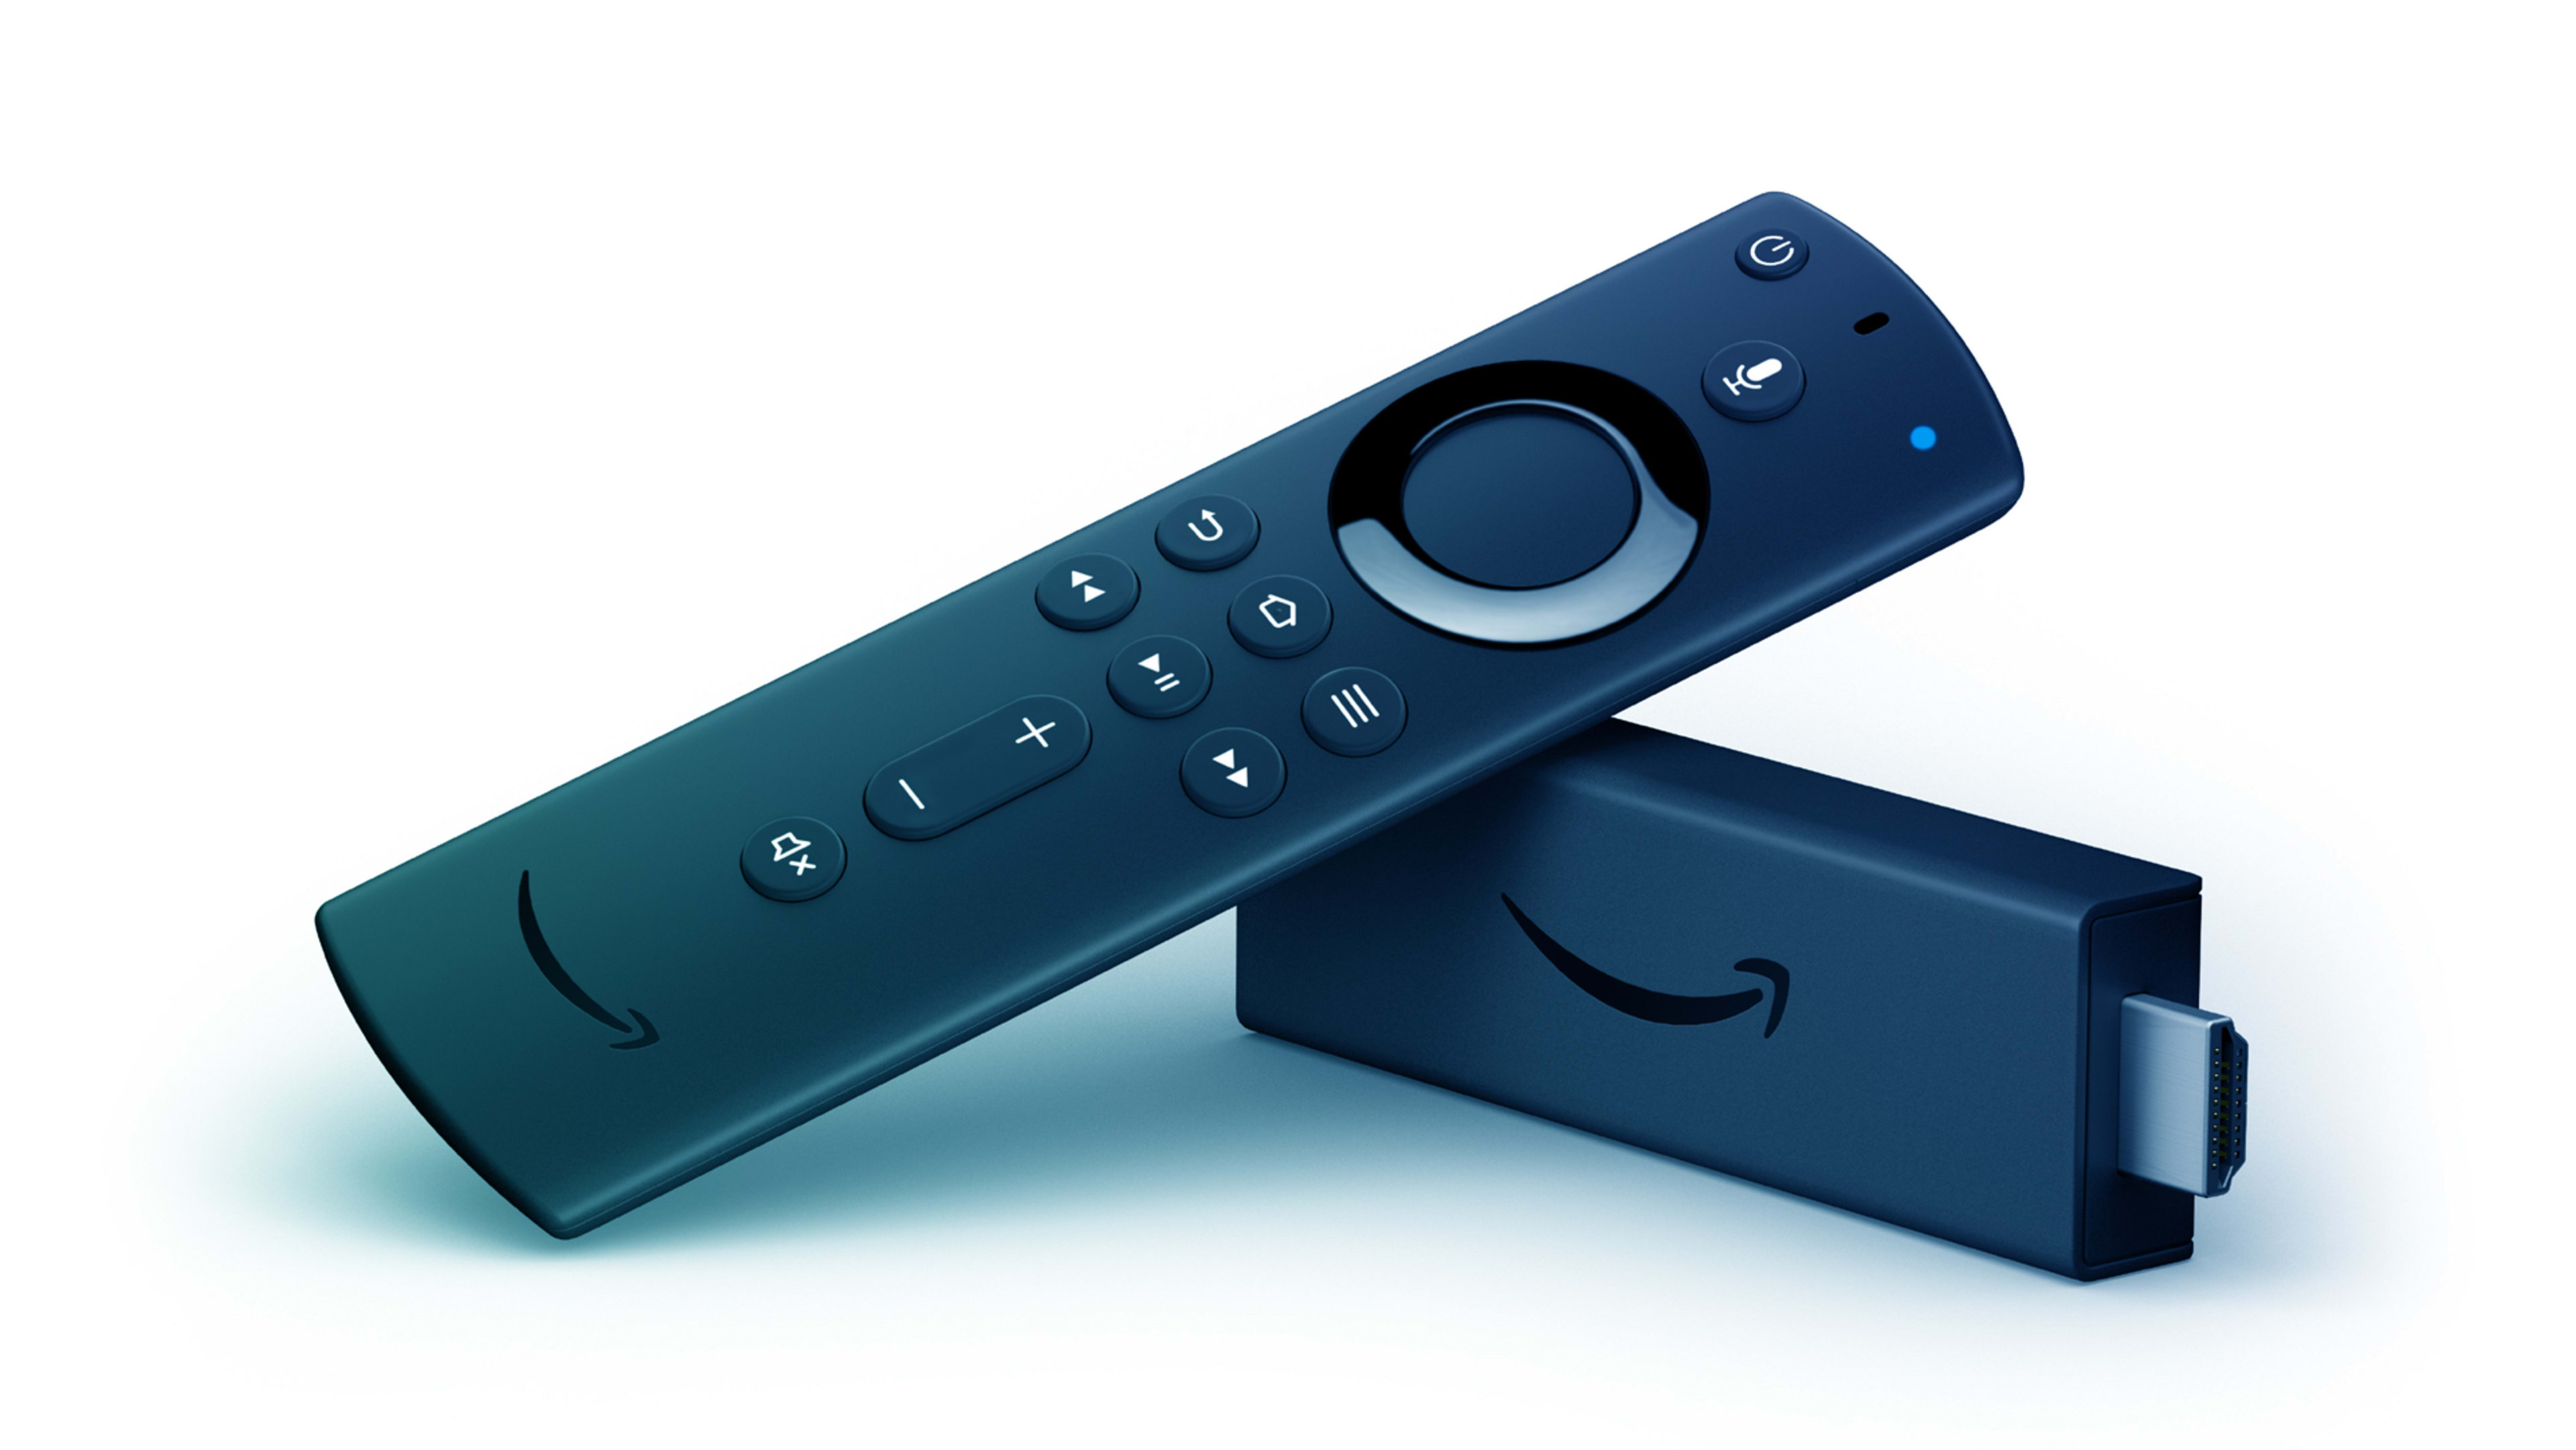 Amazon says Fire TV is bigger than Roku, but there are caveats